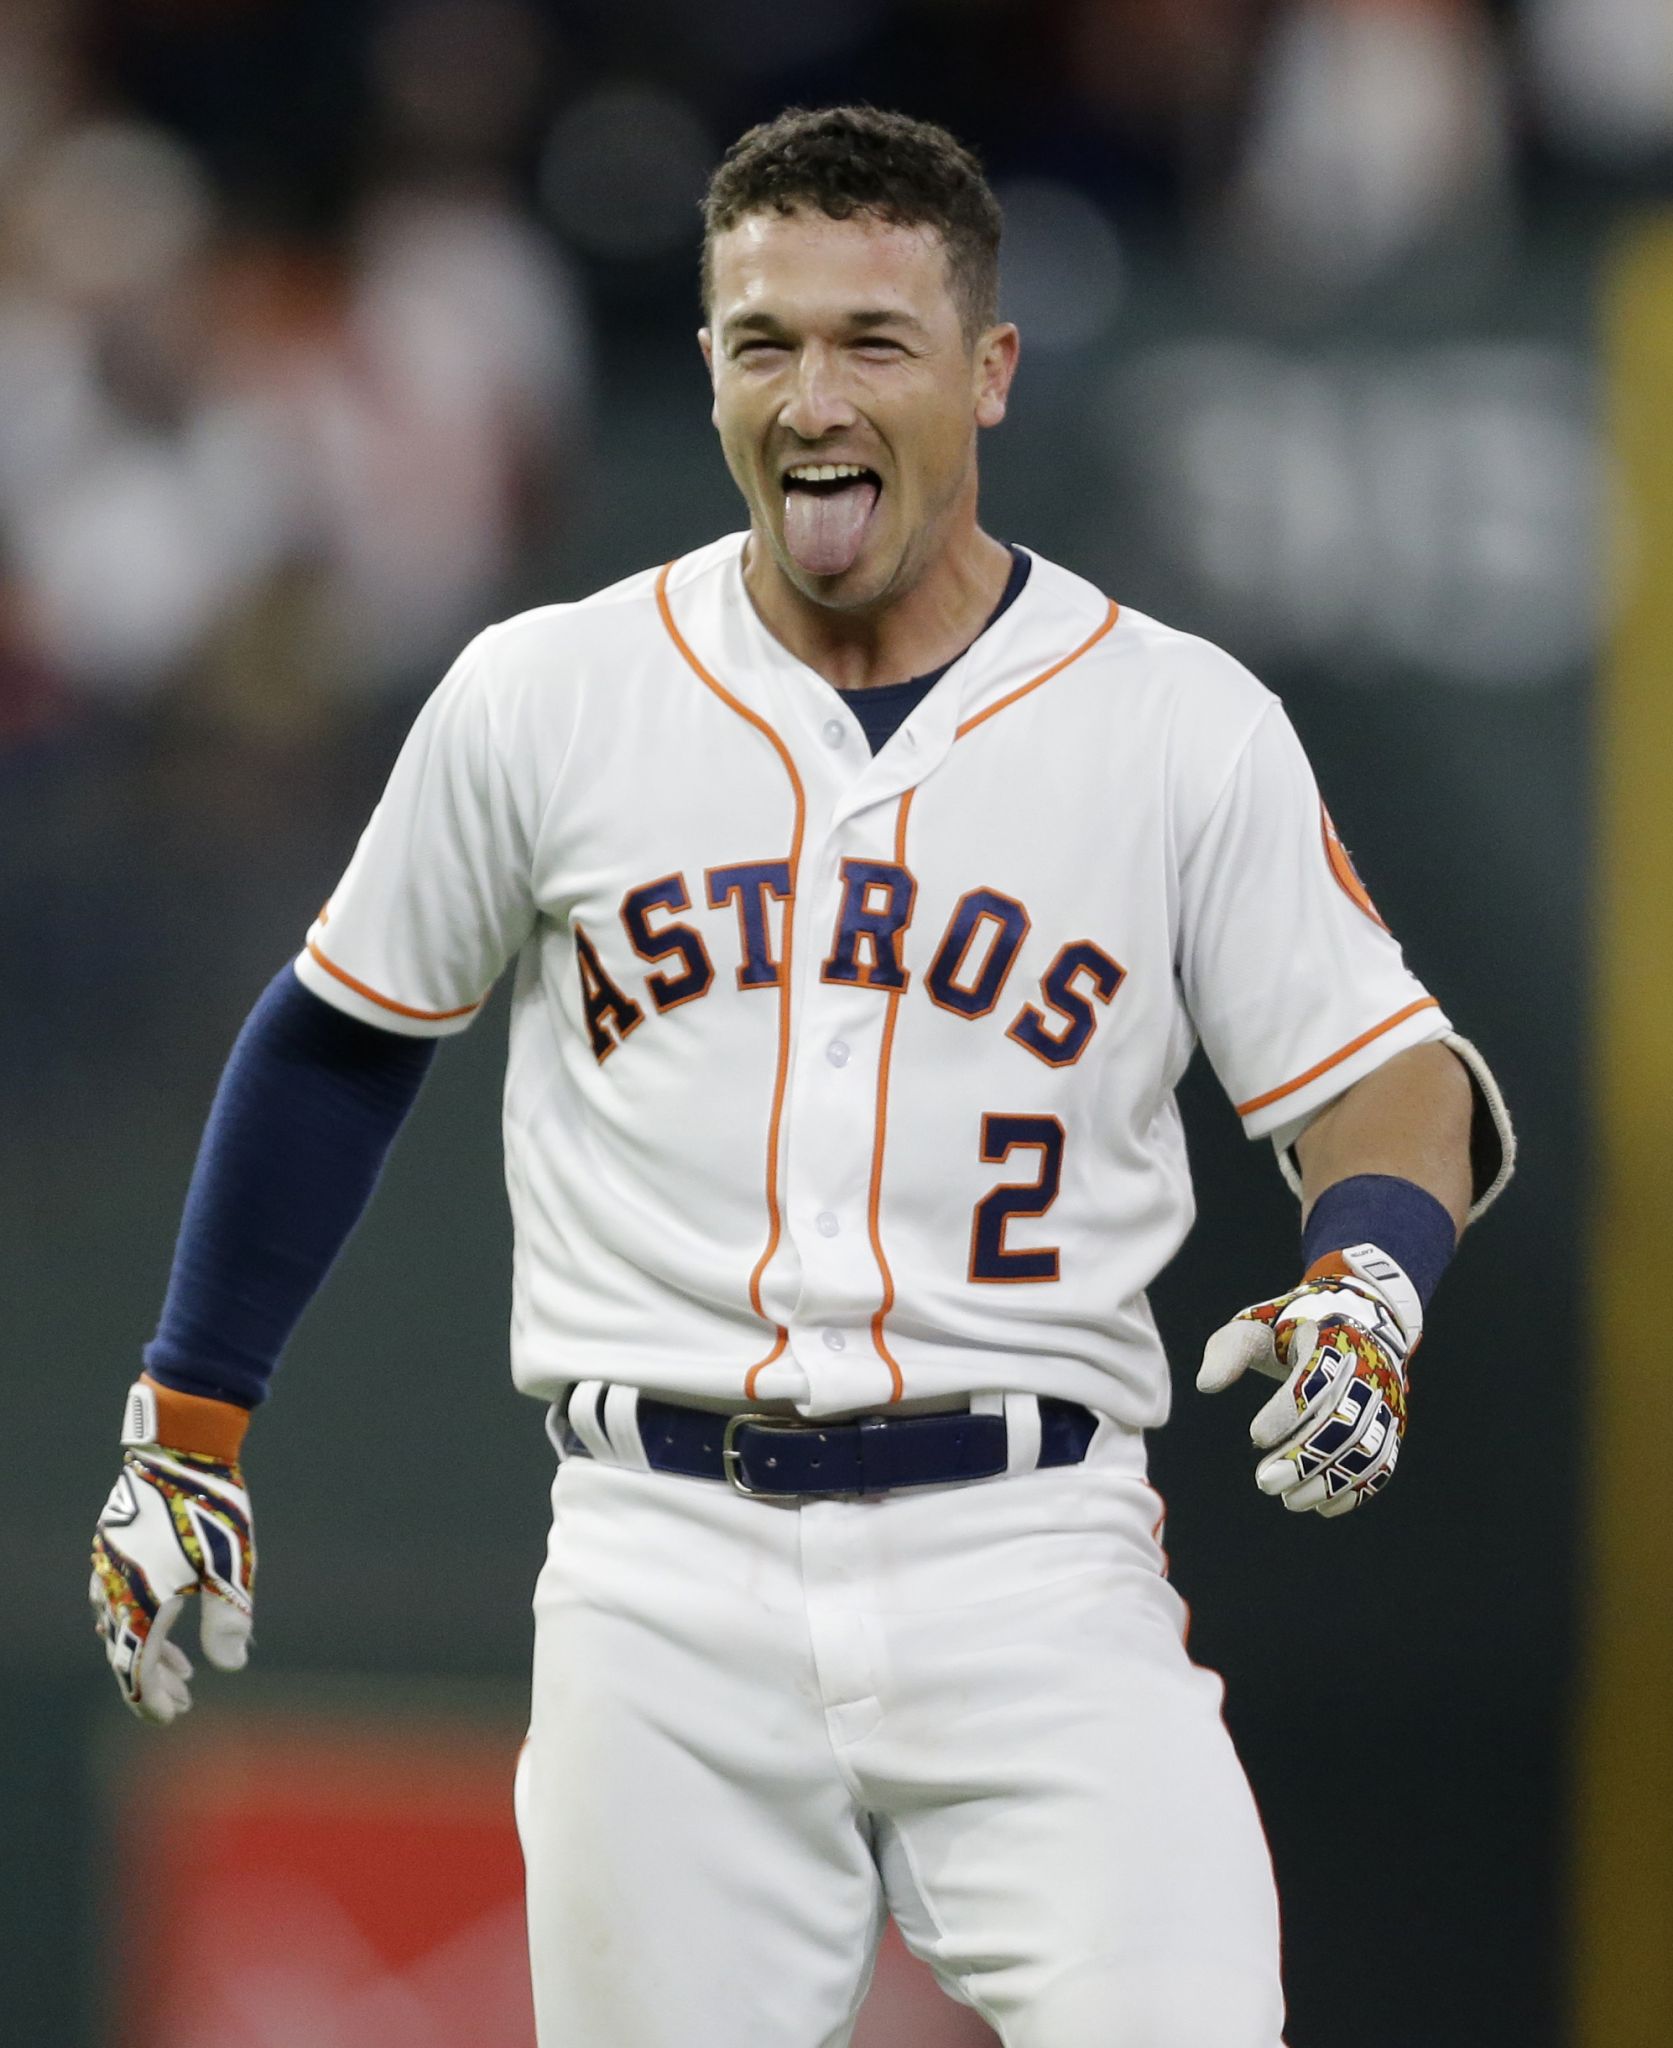 Astros Player Walk-Up Songs Playlist